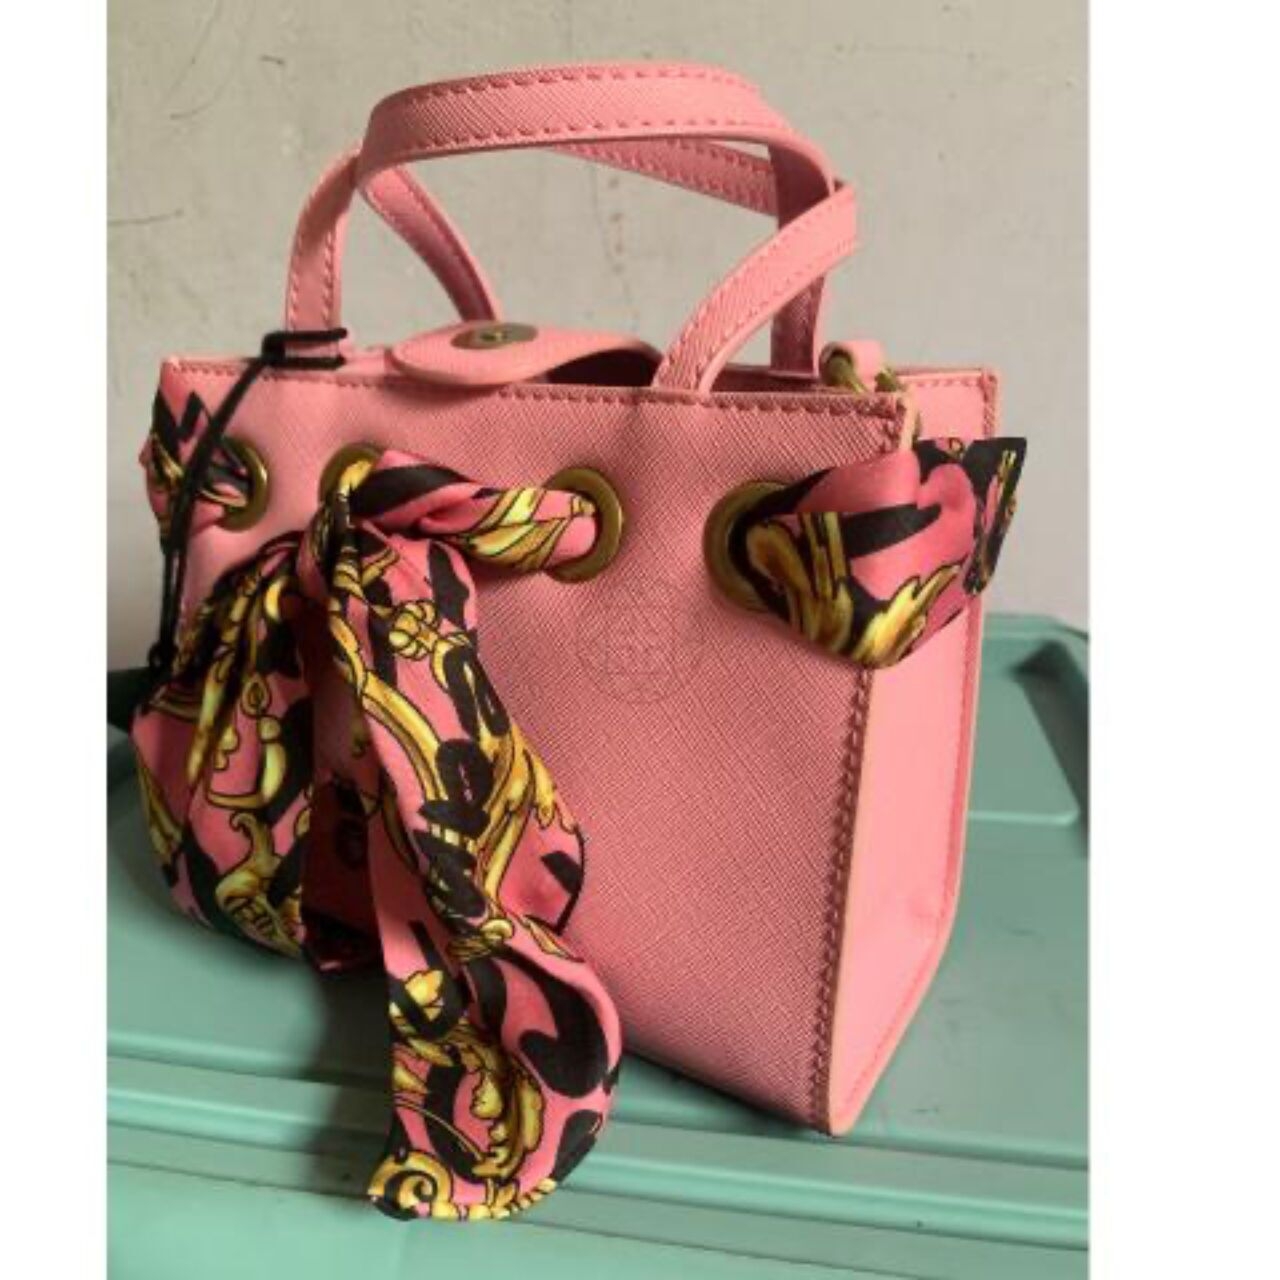 Versace Jeans Couture Range A Thelma Pink Tote Bag